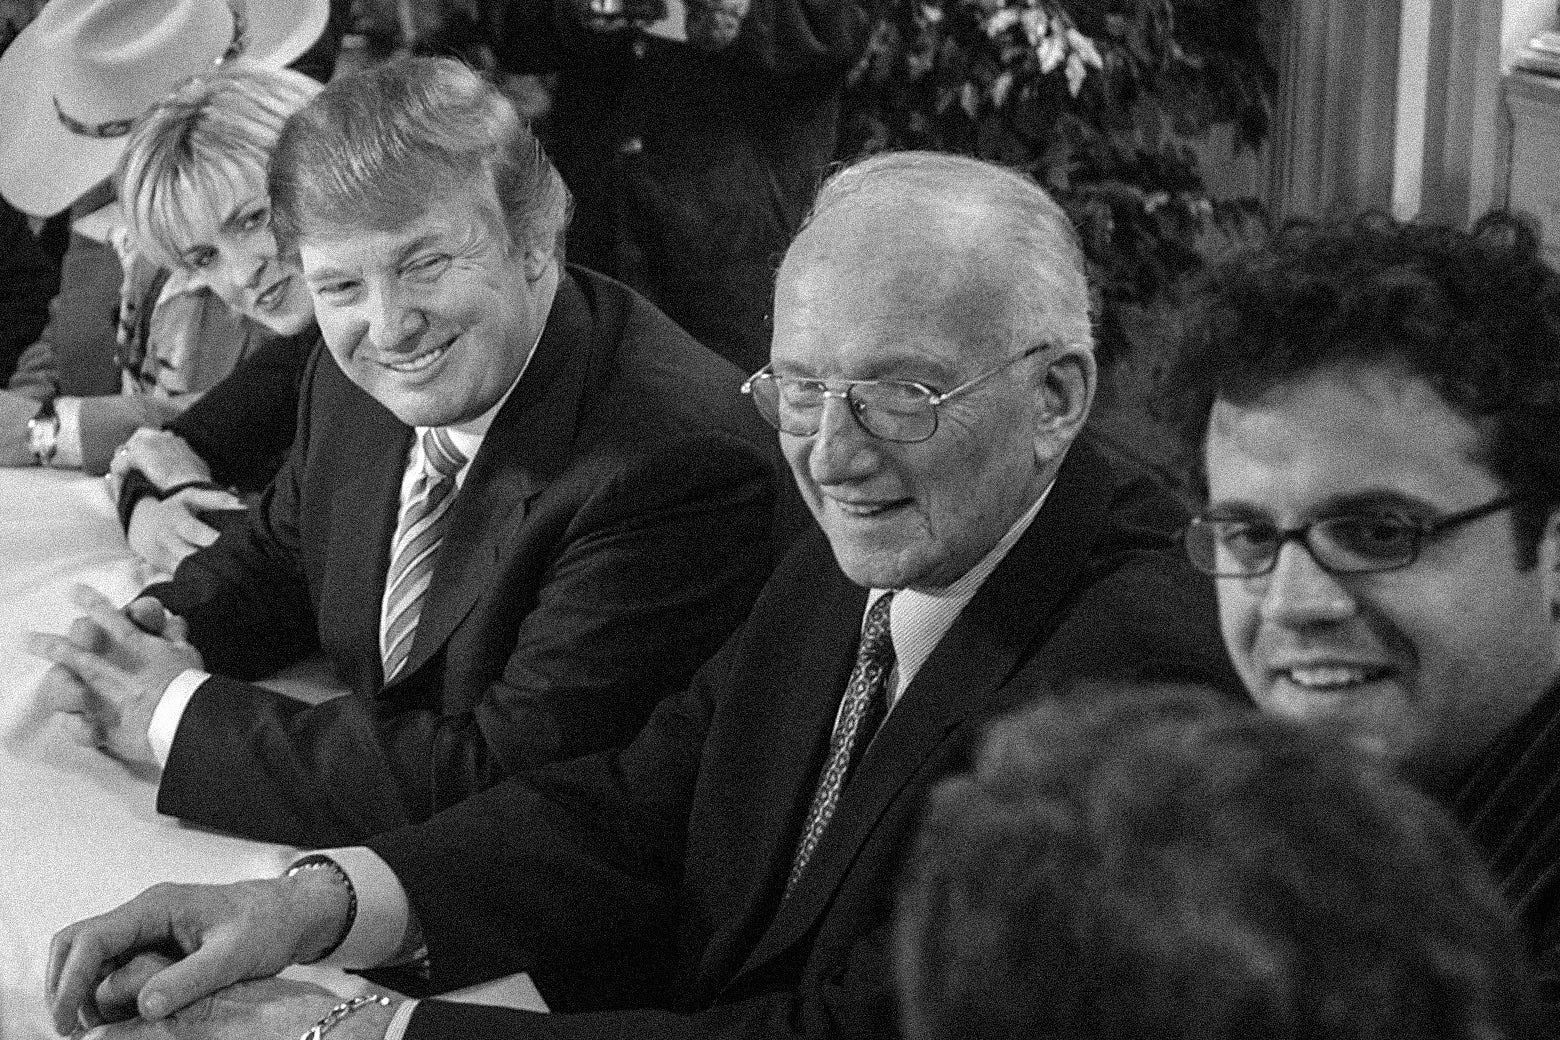 Kepcher, Trump, Ross, and LaPlante smile around a table while talking to a contestant.